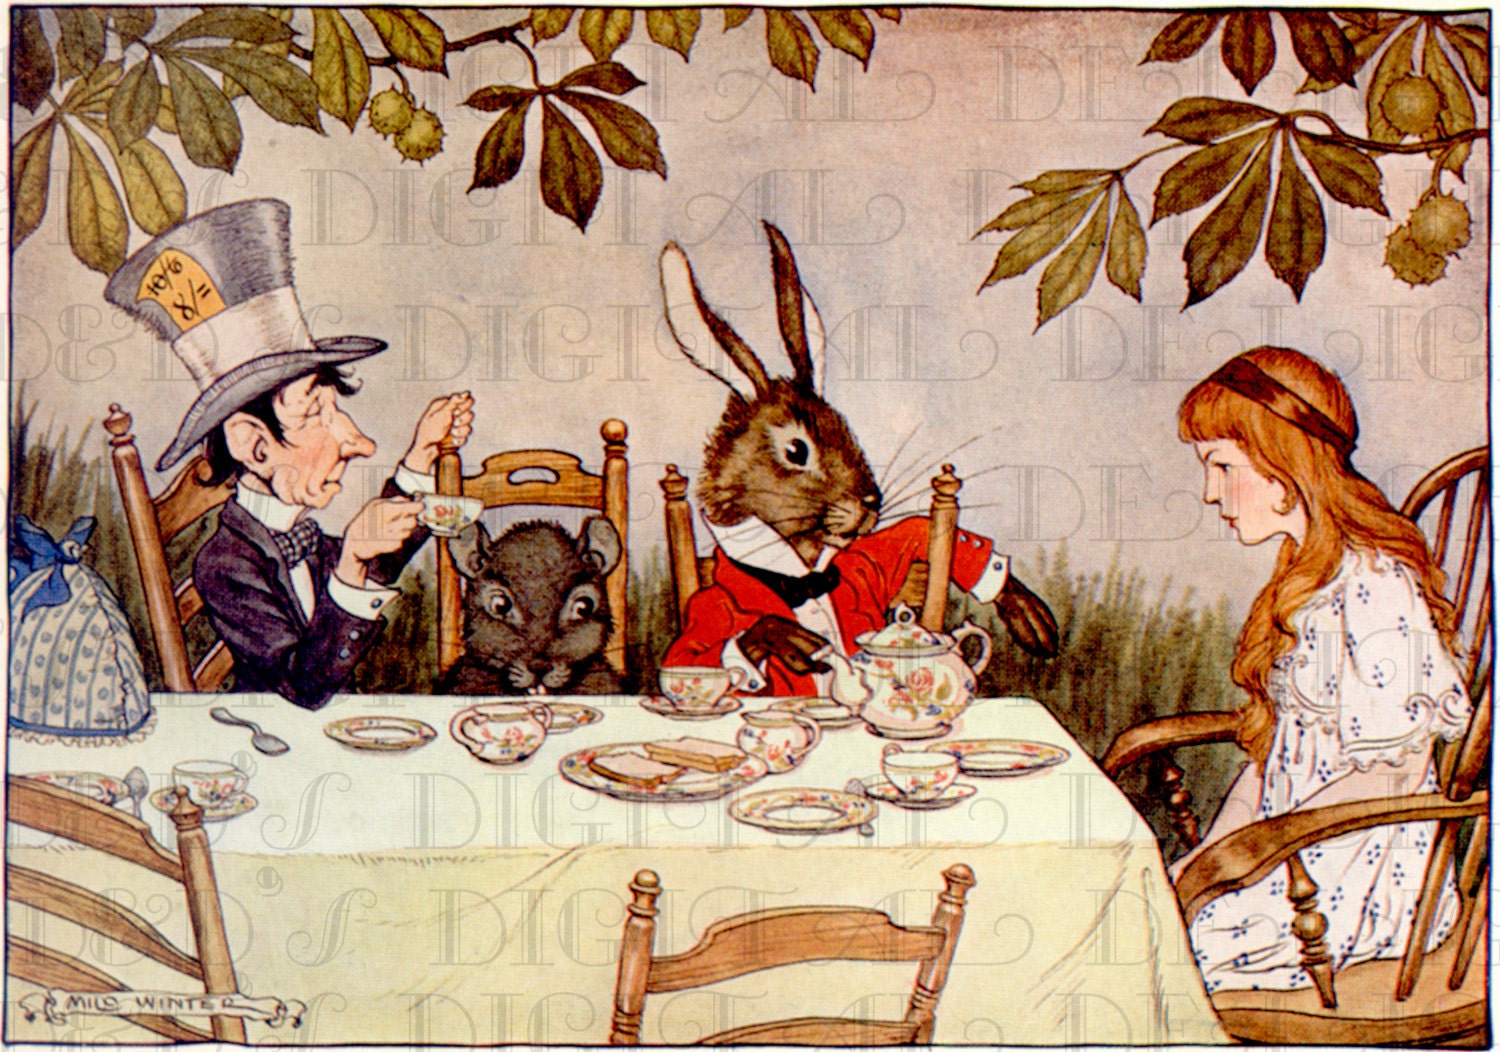 From First Edition Lovely Tea Party Alice In Wonderland 